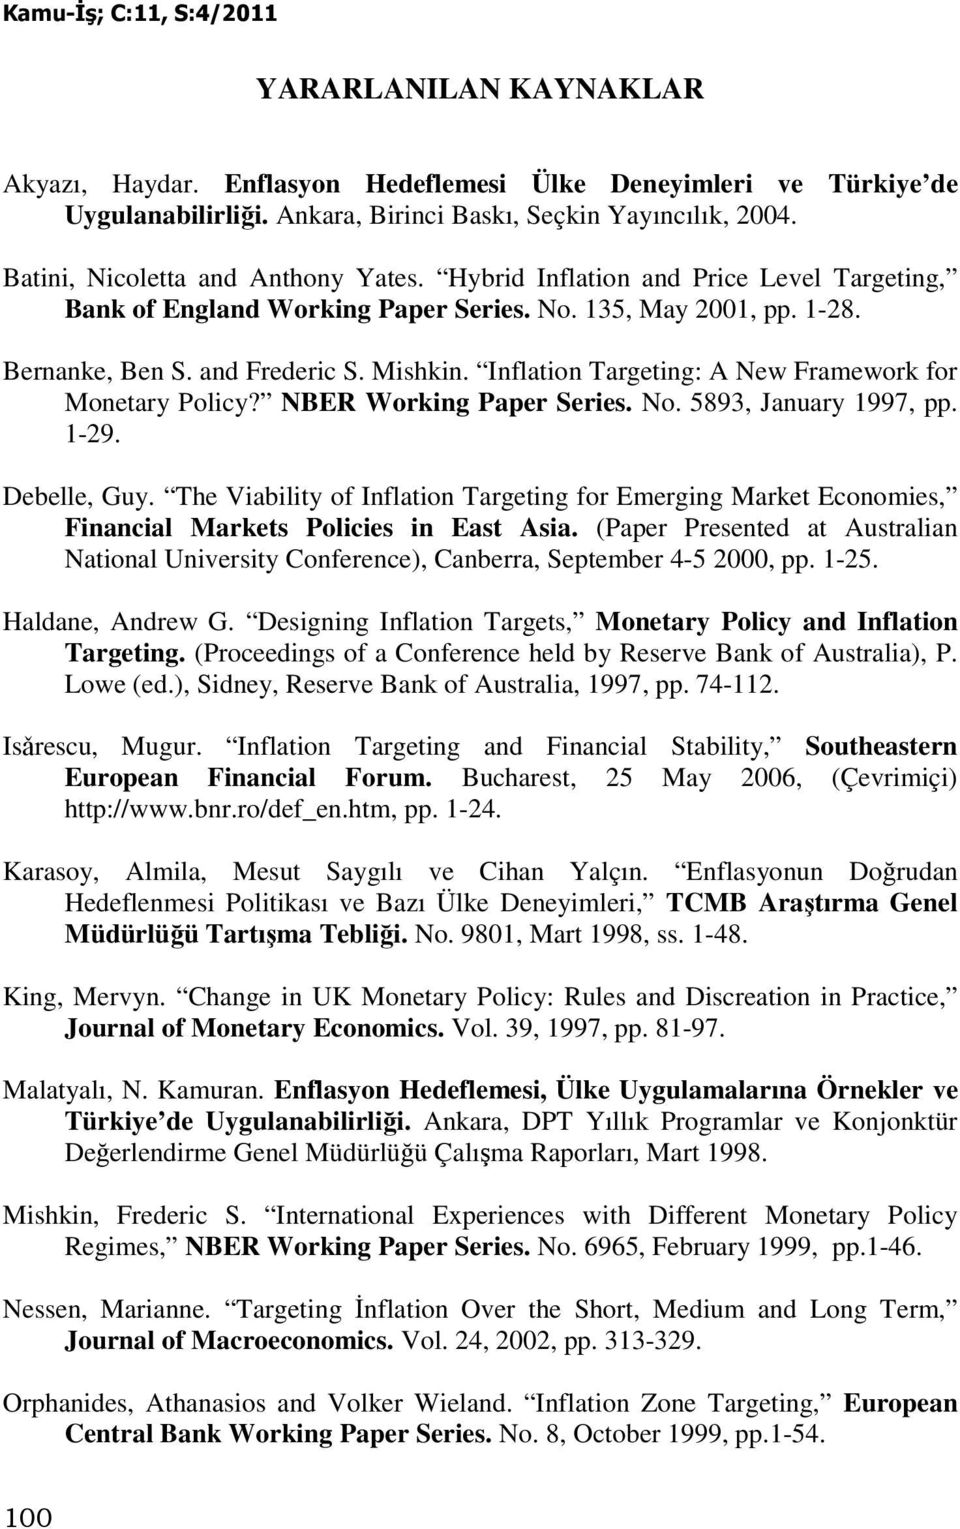 Inflaion Targeing: A New Framework for Moneary Policy? NBER Working Paper Series. No. 5893, January 997, pp. -9. Debelle, Guy.